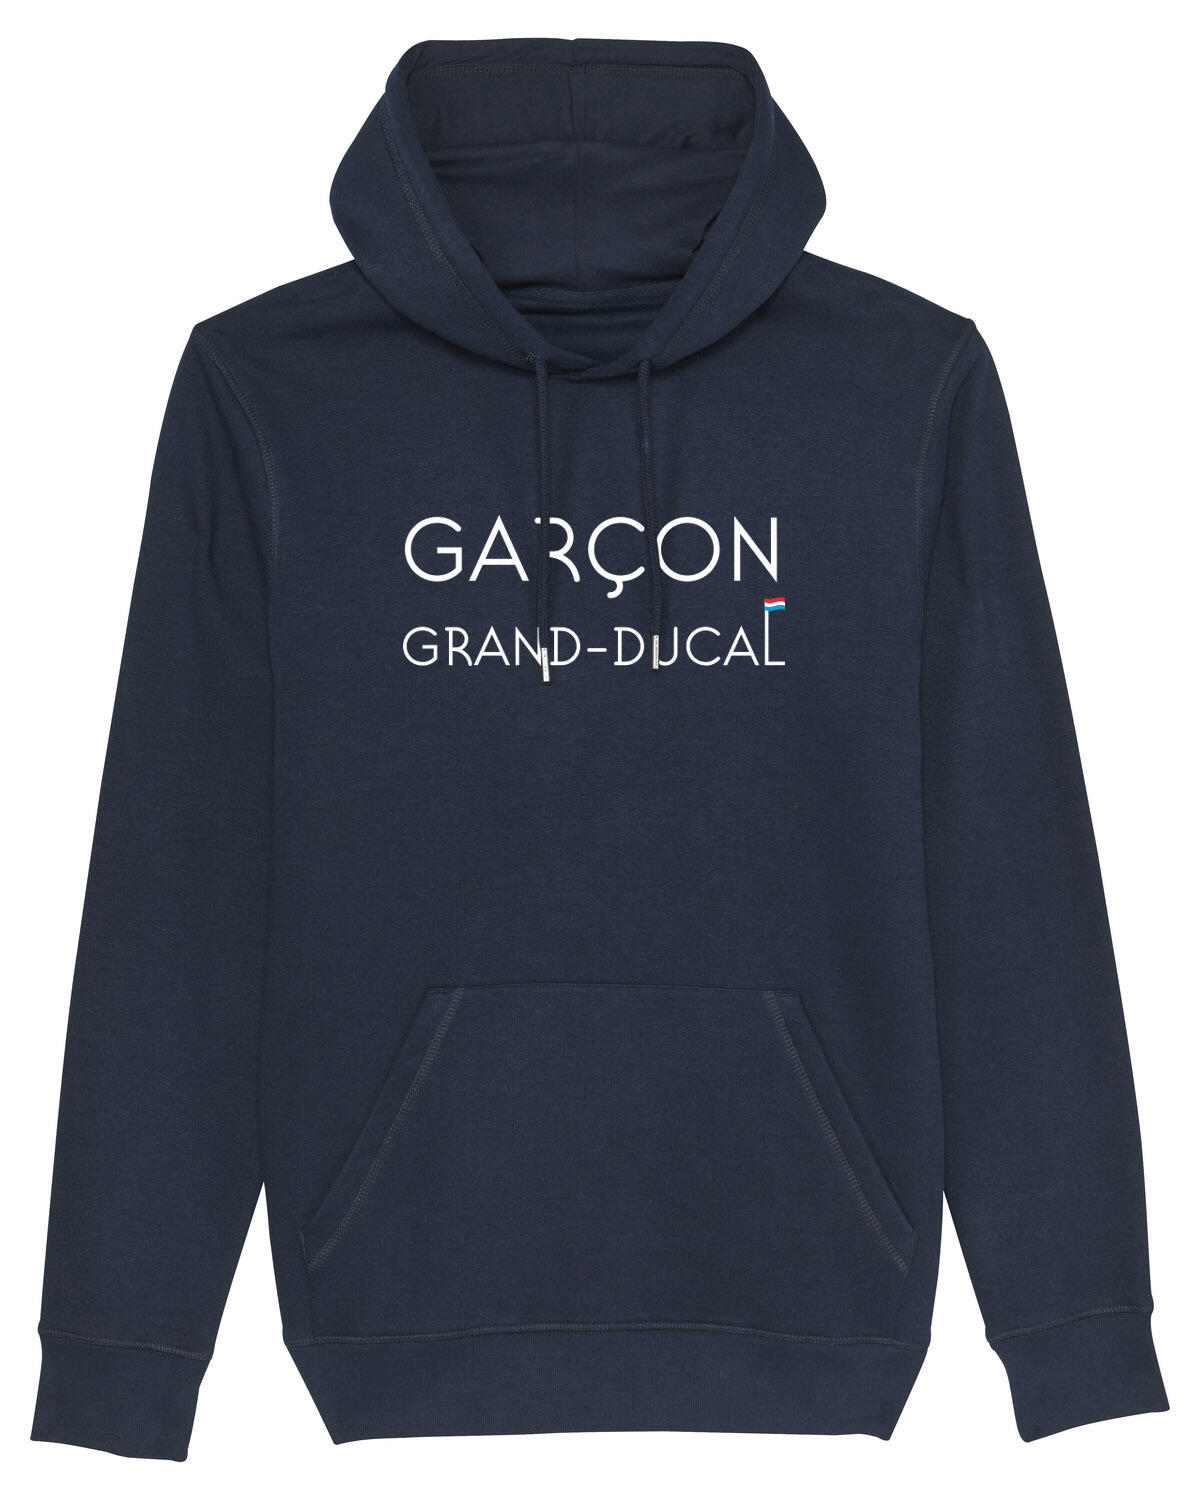 LE HOODIE ICONIC GARCON GRAND-DUCAL